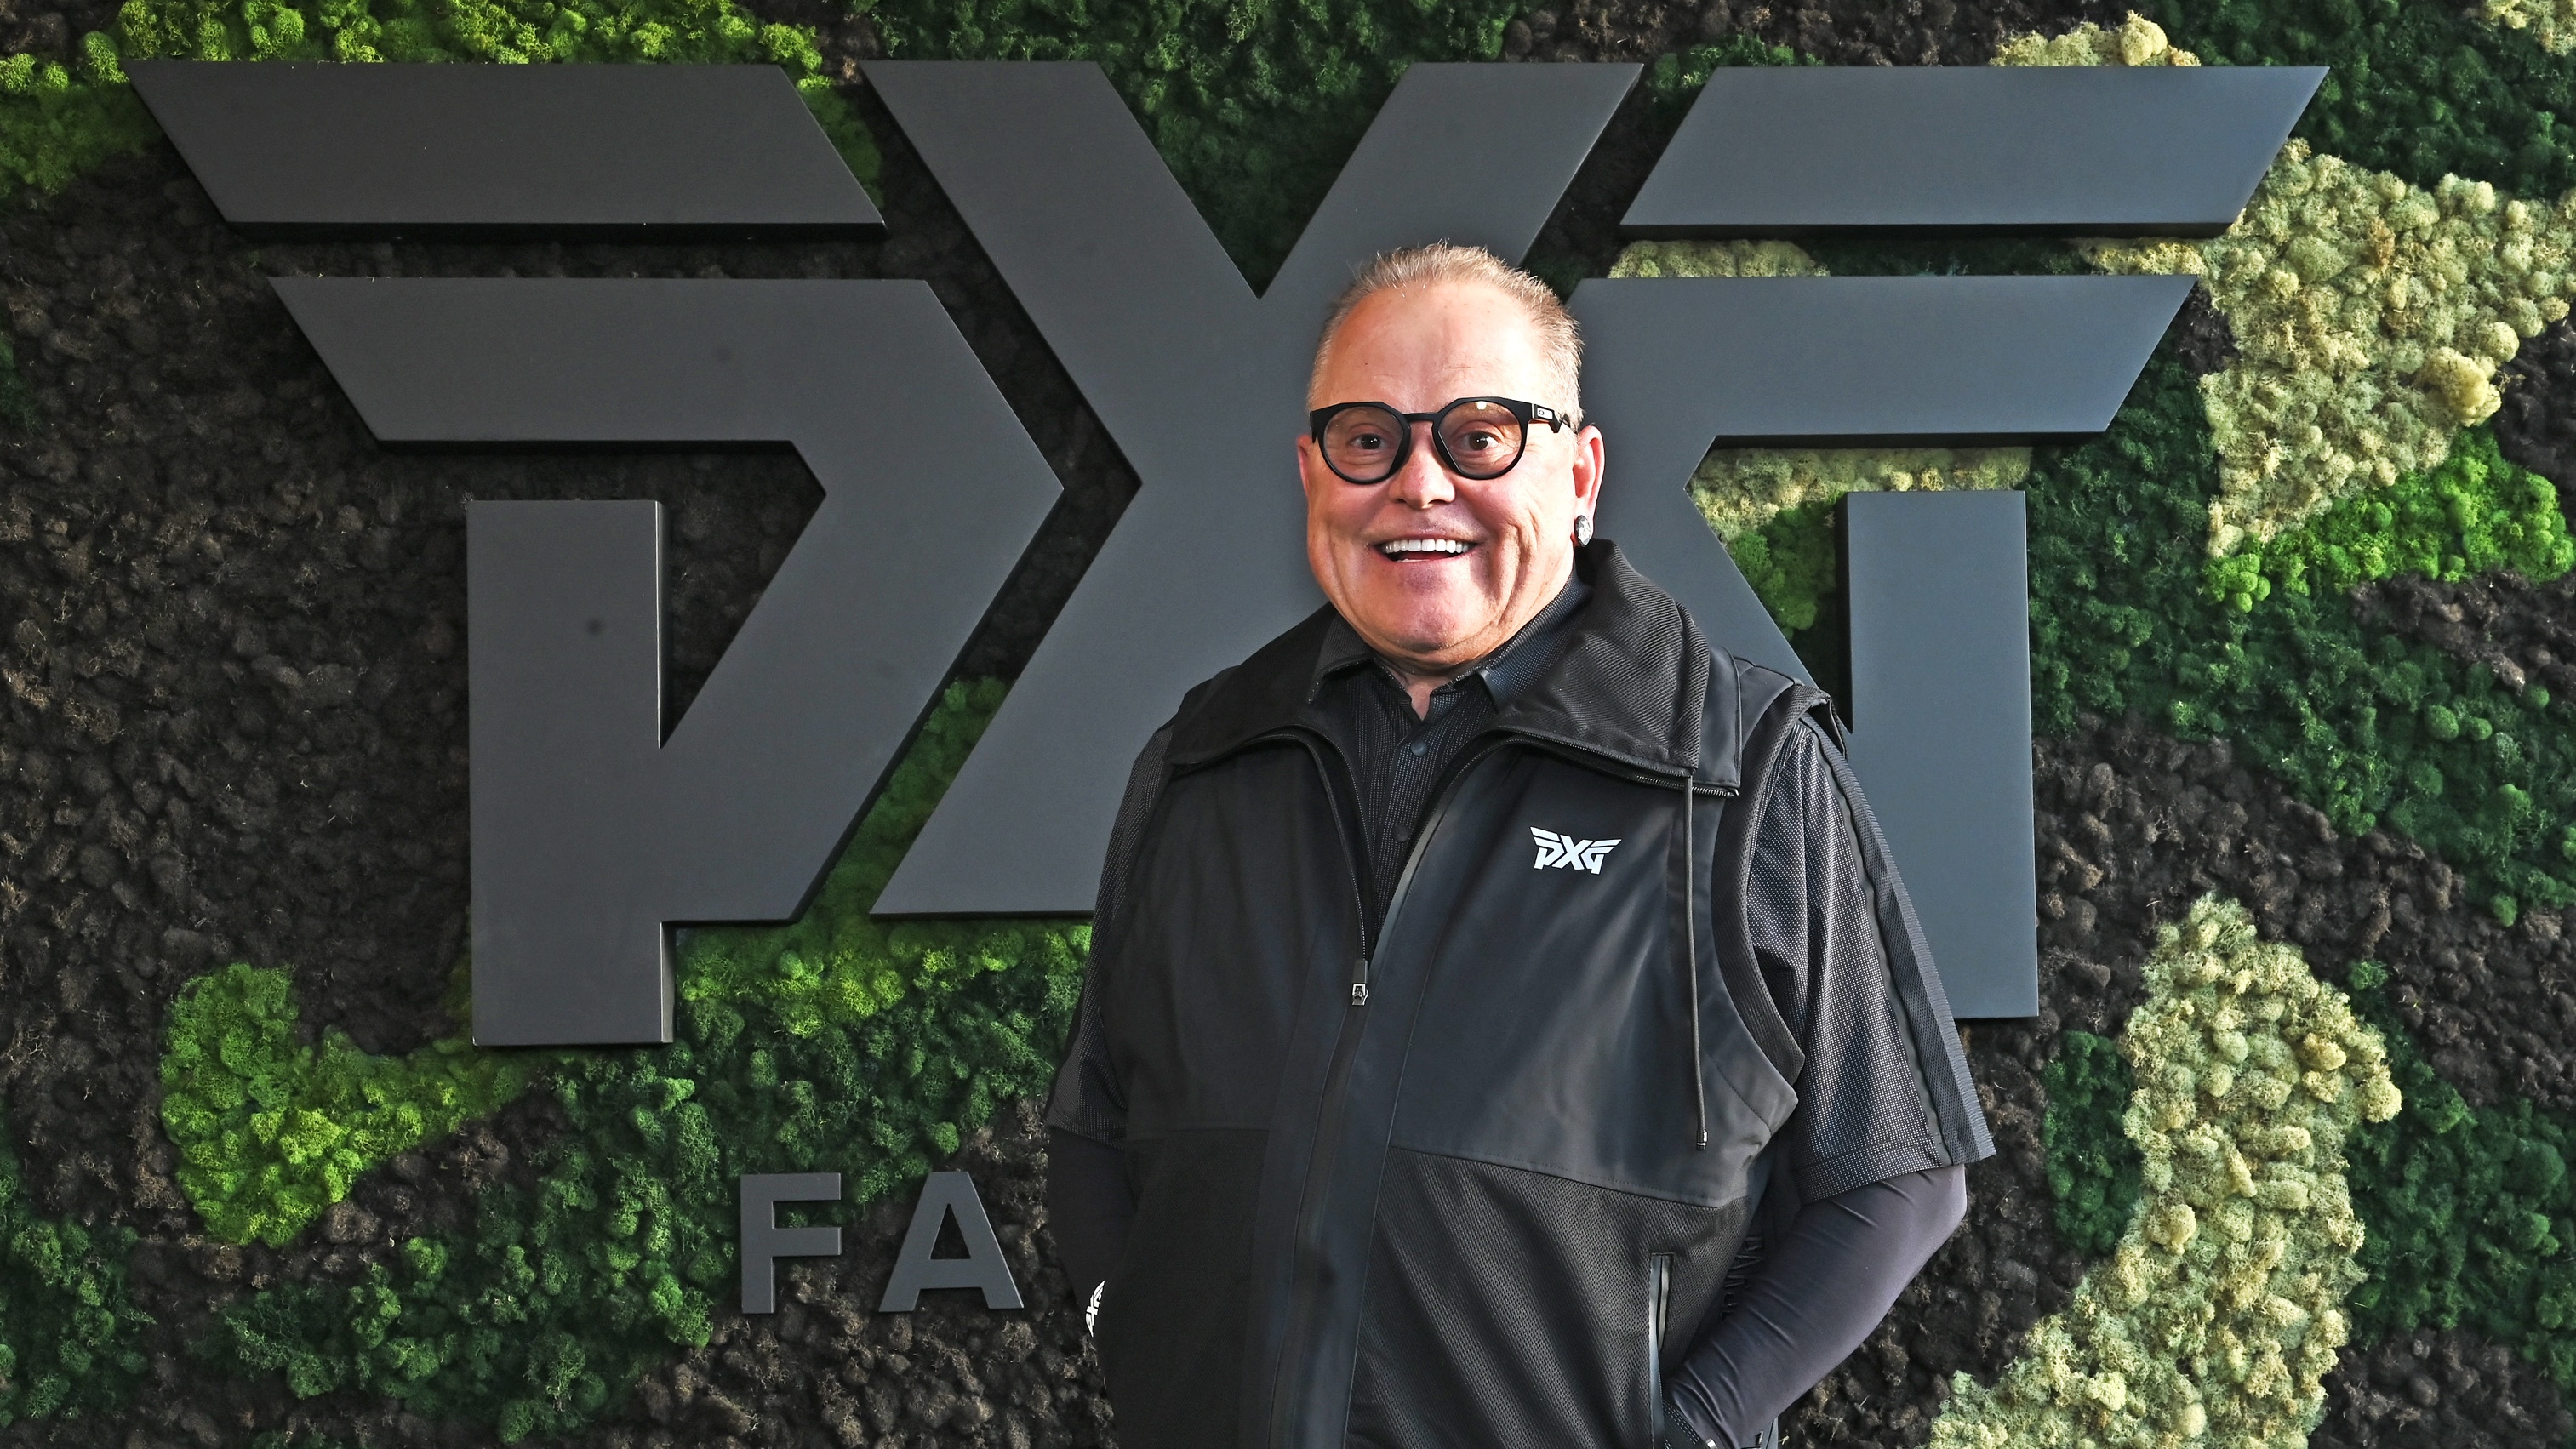 PXG founder and billionaire Bob Parsons tells us how he's making golf more  inclusive